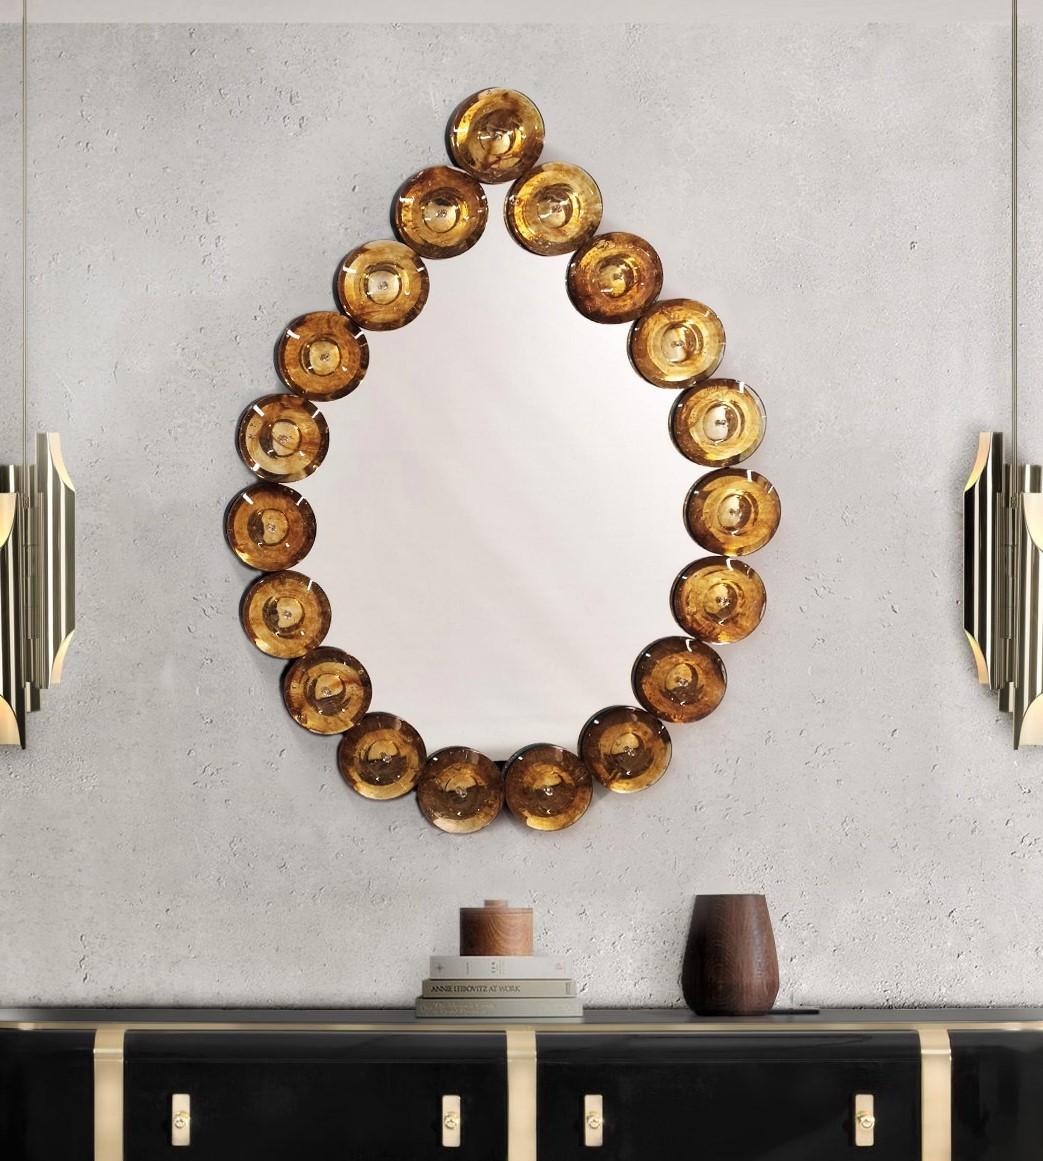 A fun decorative object that brings light and color in your interior! Contemporary Italian Custom Murano Glass Disk Mirror in a Modern Pearl Drop Shape Design, the mirror frame is composed of 19 Murano glass round elements of amber color with a